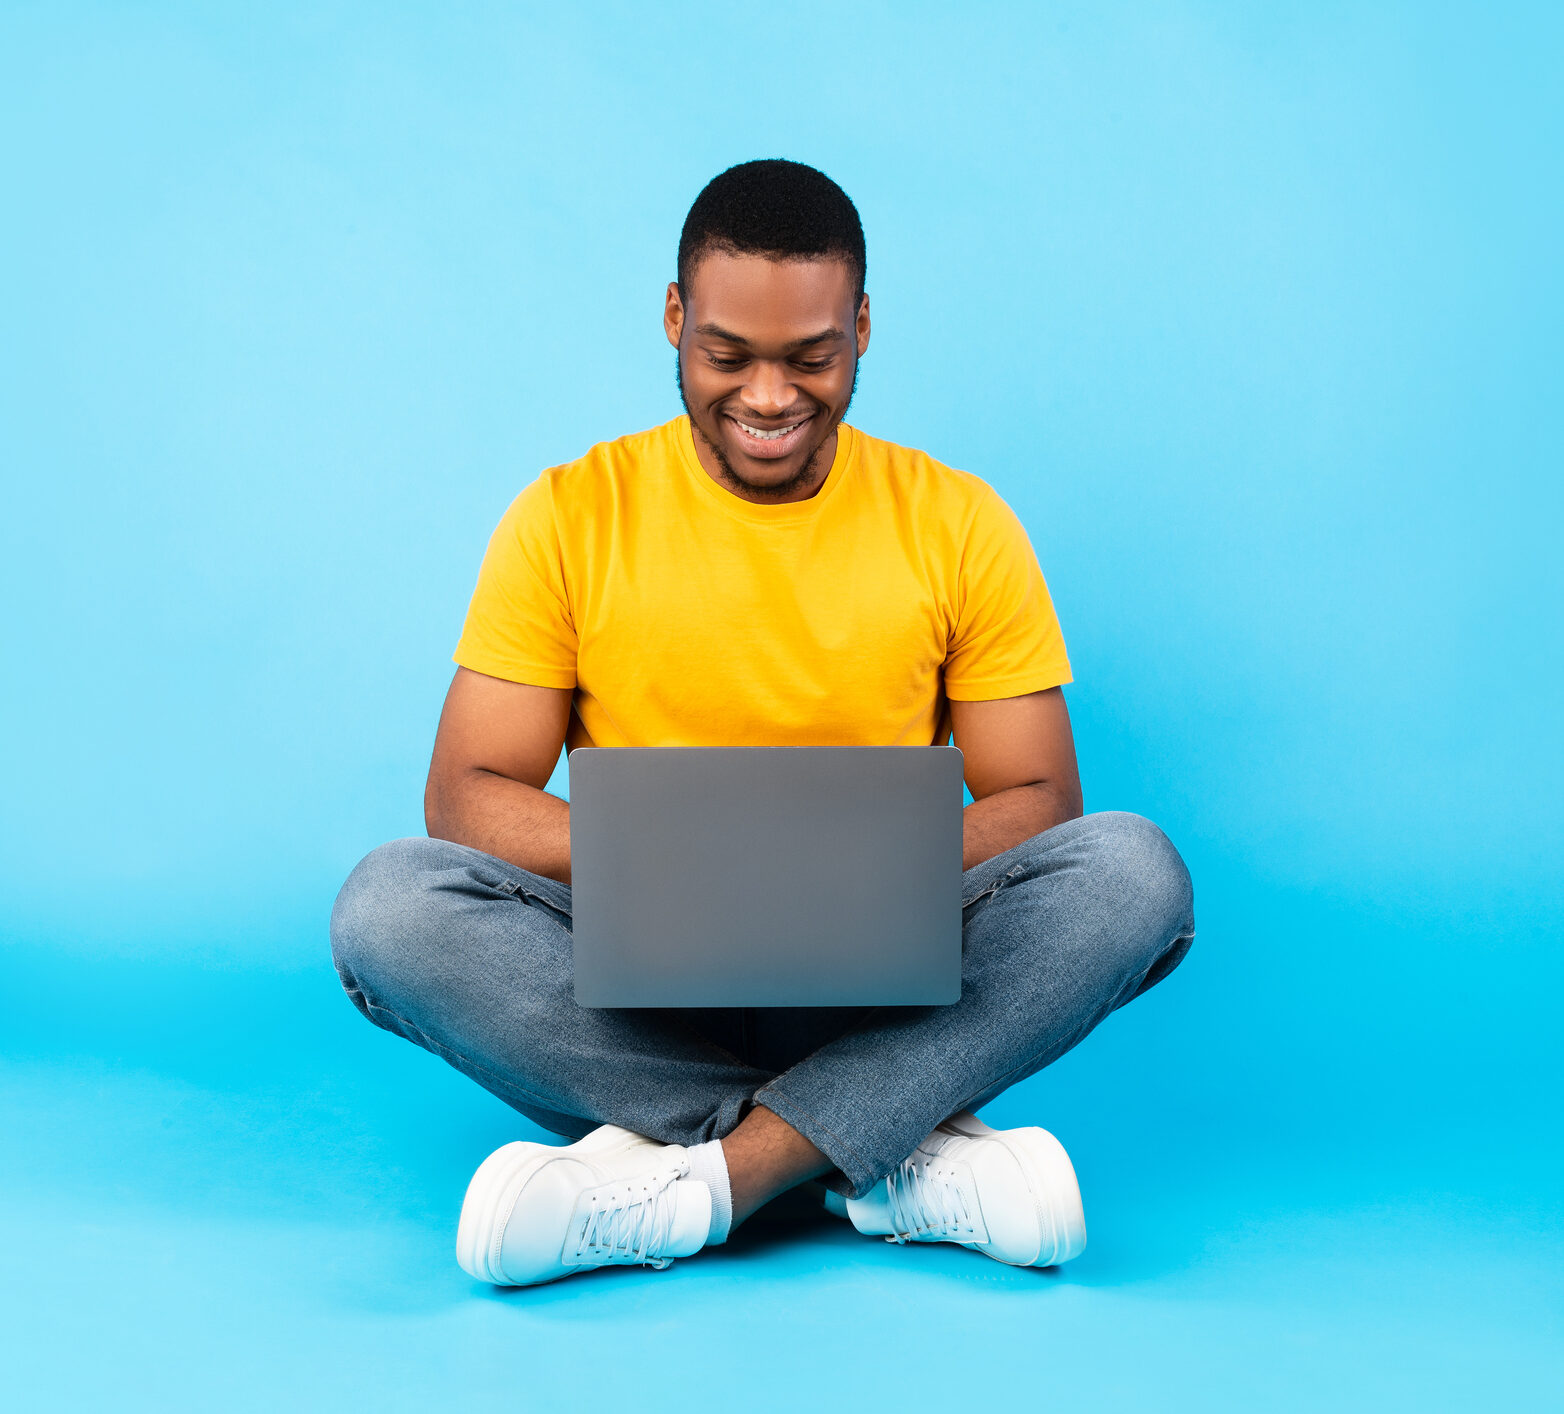 Young man in yellow shirt sitting cross legged happily looking down at laptop with blue background.